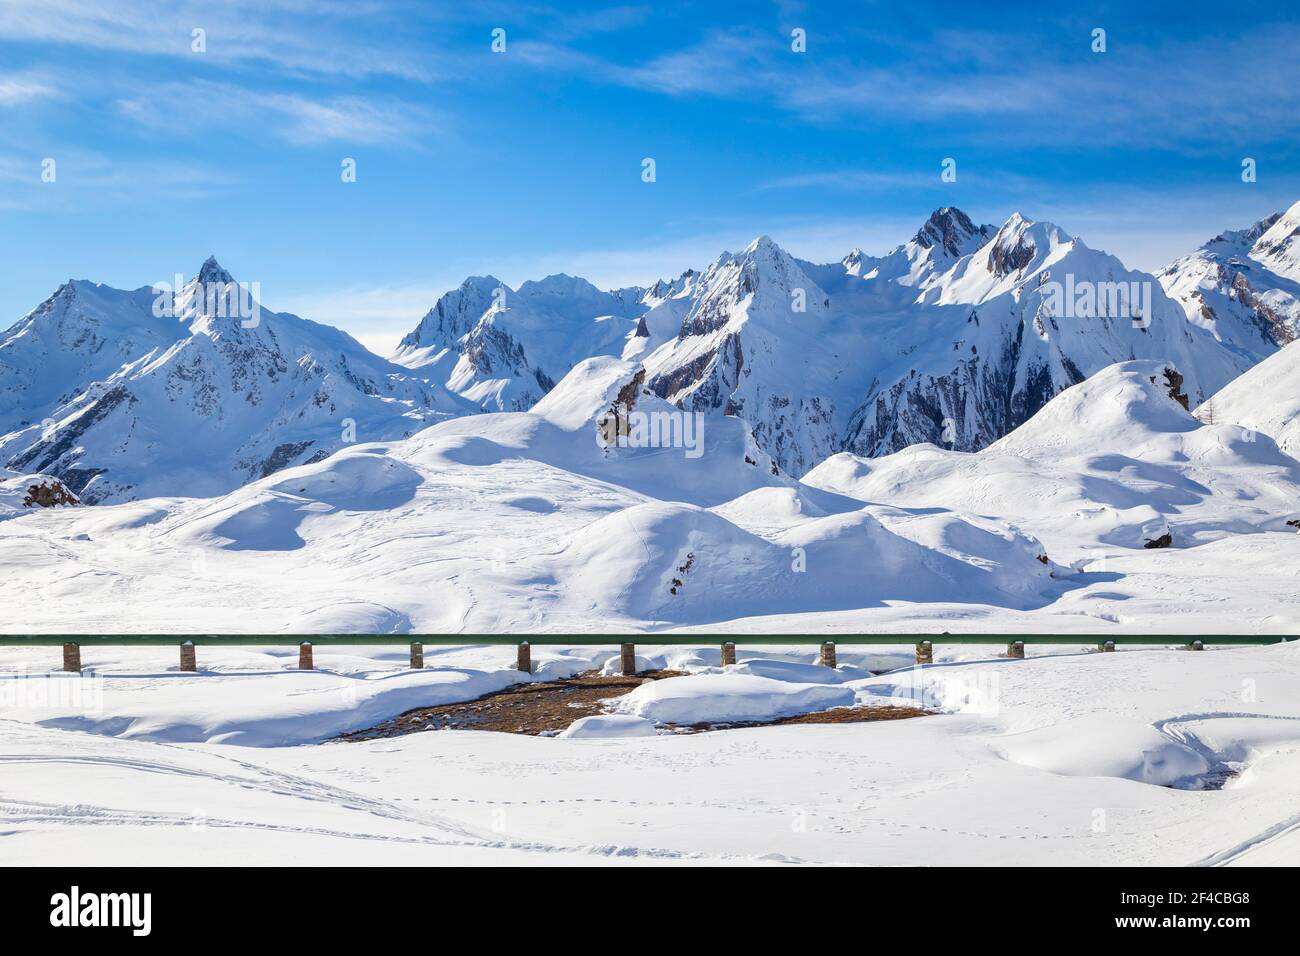 View of a pipeline from the dams of the high Formazza Valley in winter. Riale, Formazza, Valle Formazza, Verbano Cusio Ossola, Piedmont, Italy. Stock Photo